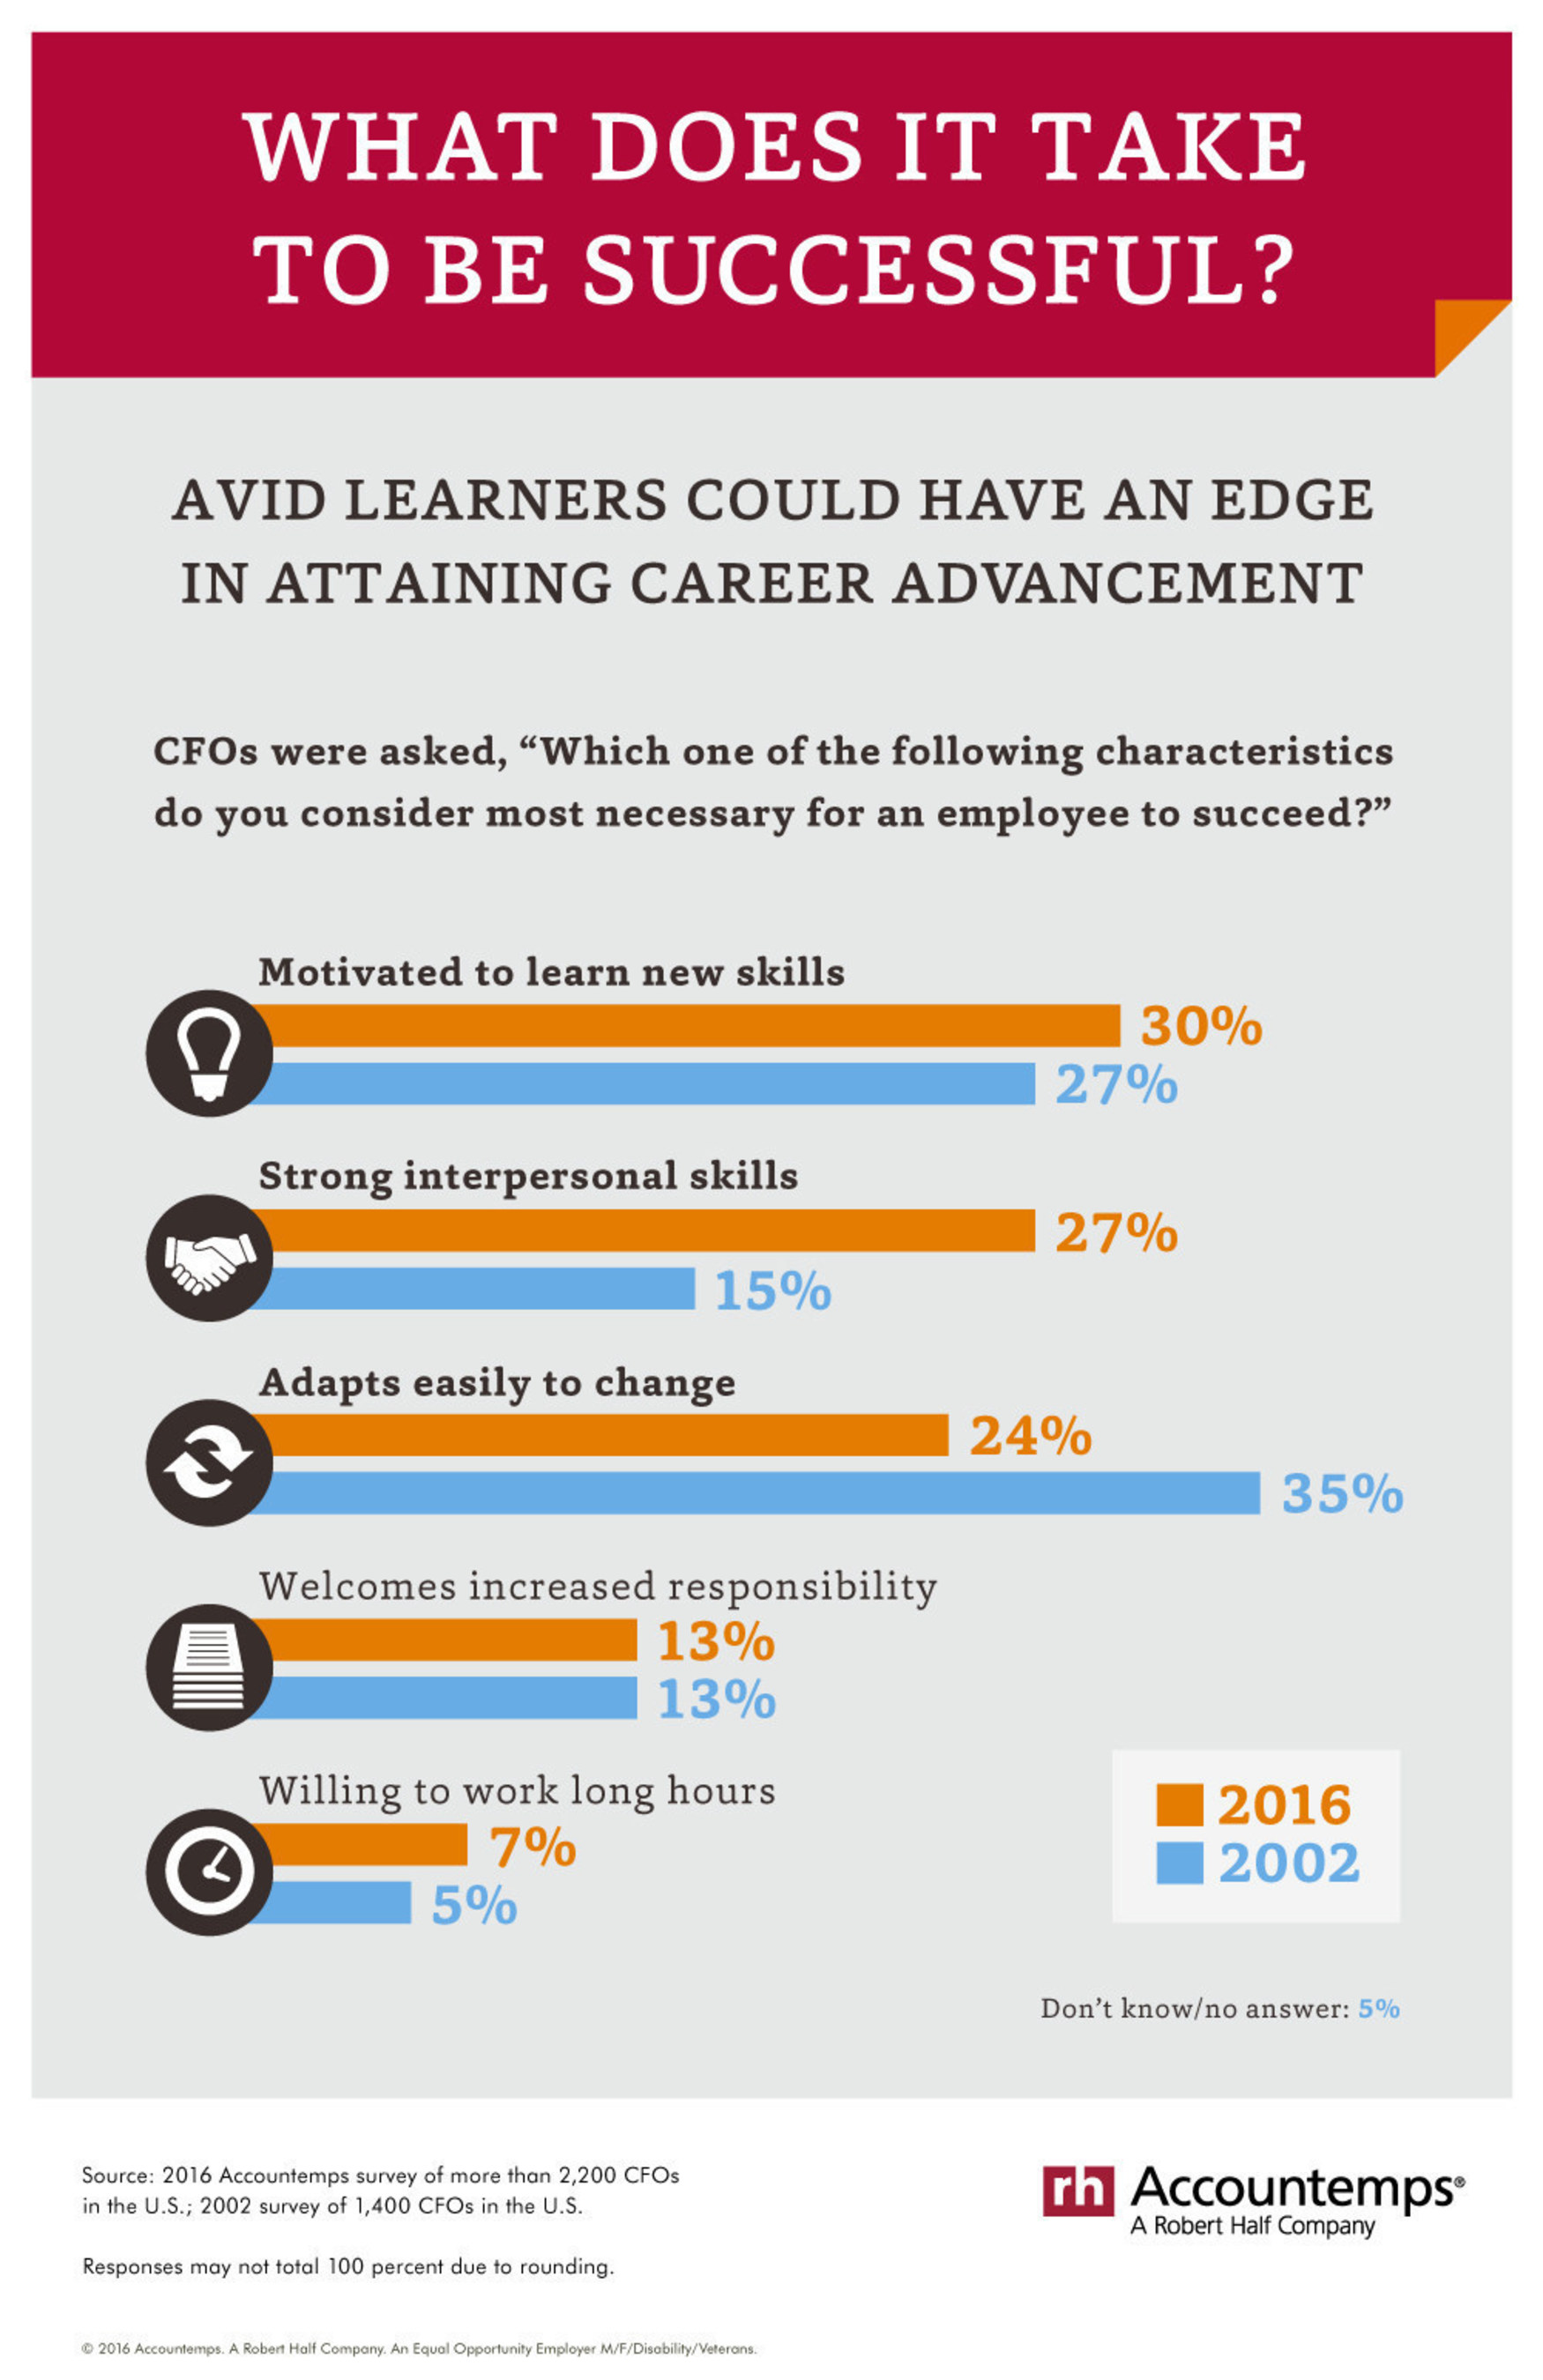 A new survey by Accountemps found 30 percent of CFOs polled said motivation to learn new skills is necessary to get ahead, followed by interpersonal skills (27 percent) and ability to adapt easily to change (24 percent).